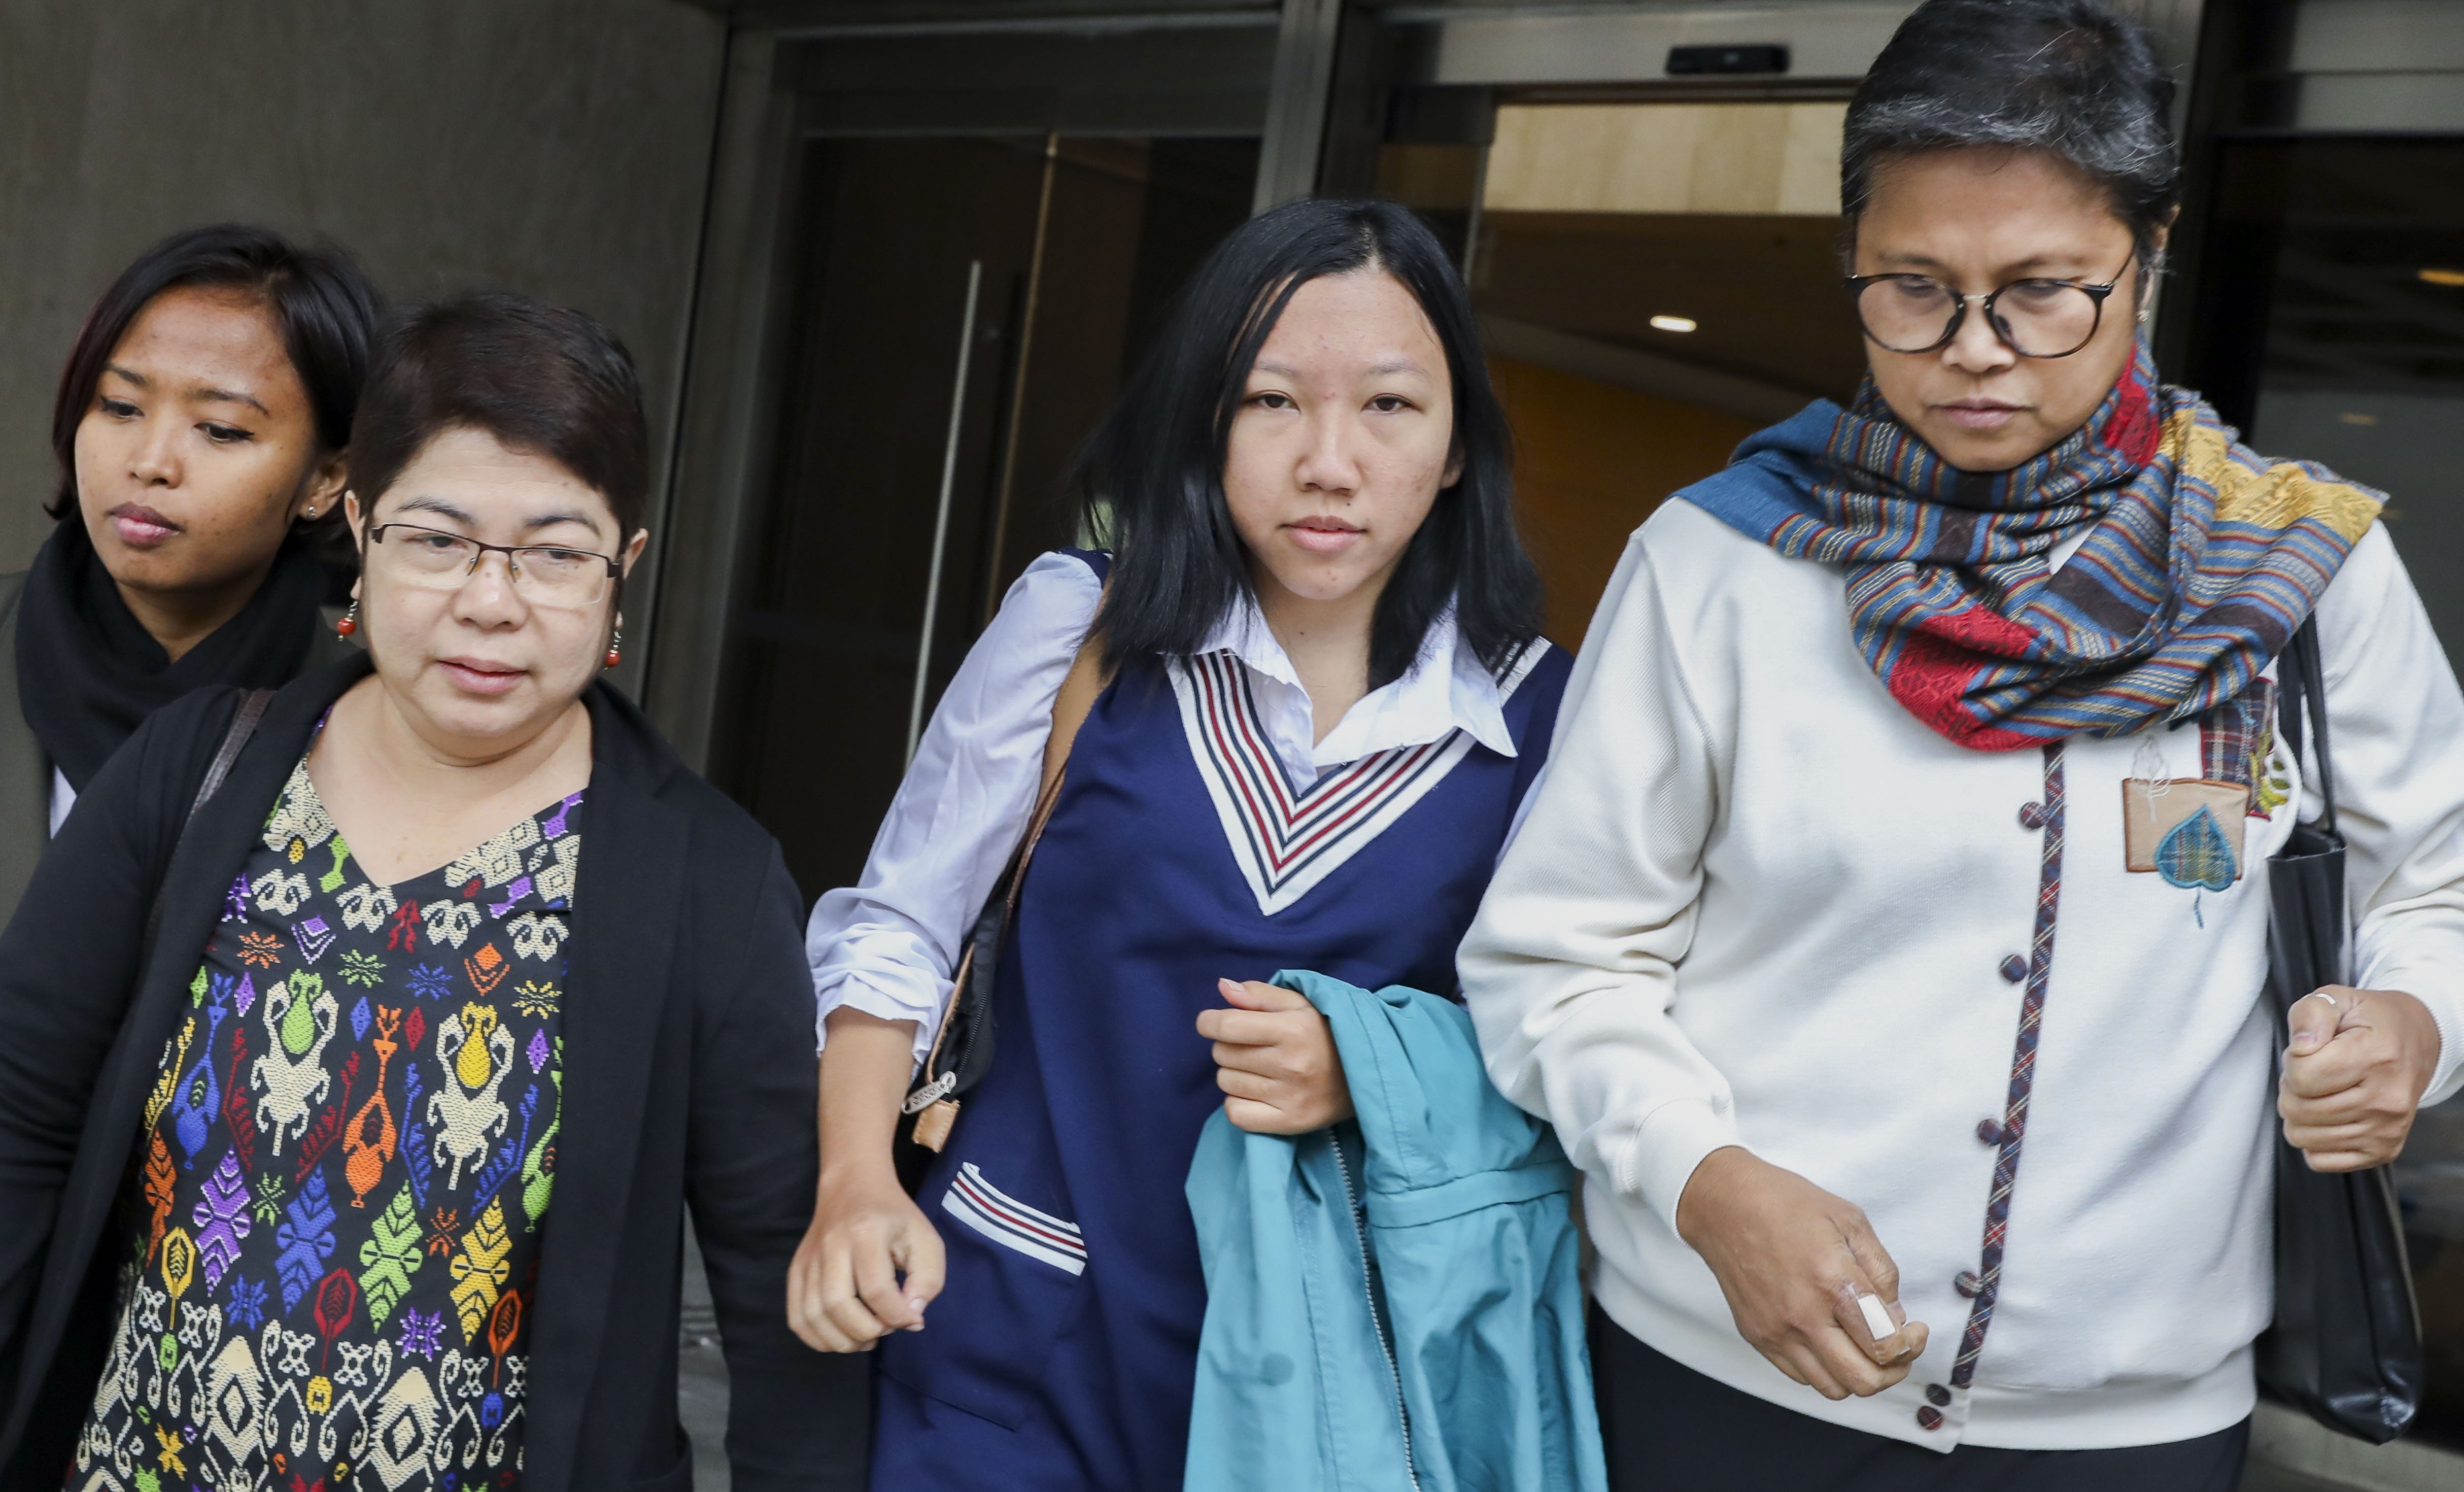 Former domestic helper Erwiana Sulistyaningsih (centre) appears at the High Court in Admiralty. Photo: Sam Tsang